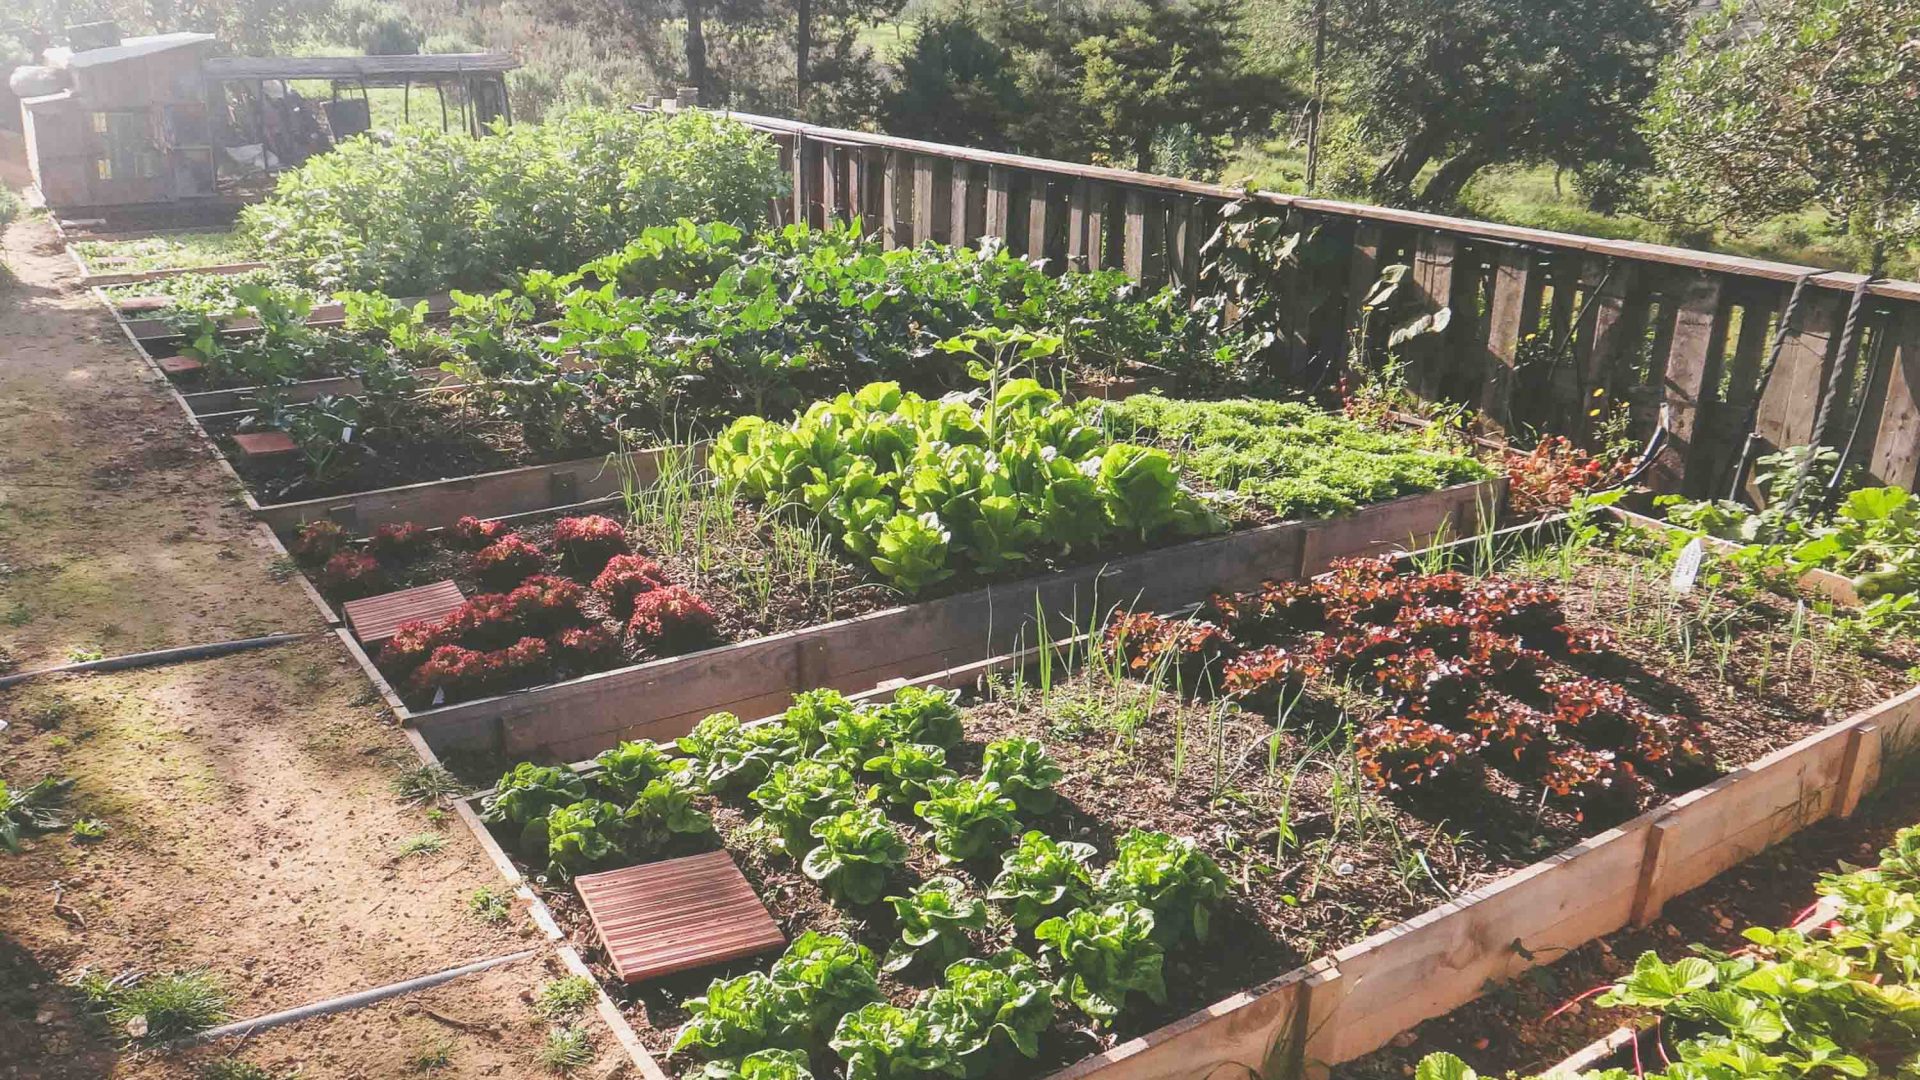 The 14 vegetable gardens at Casita Verde use recycled water.